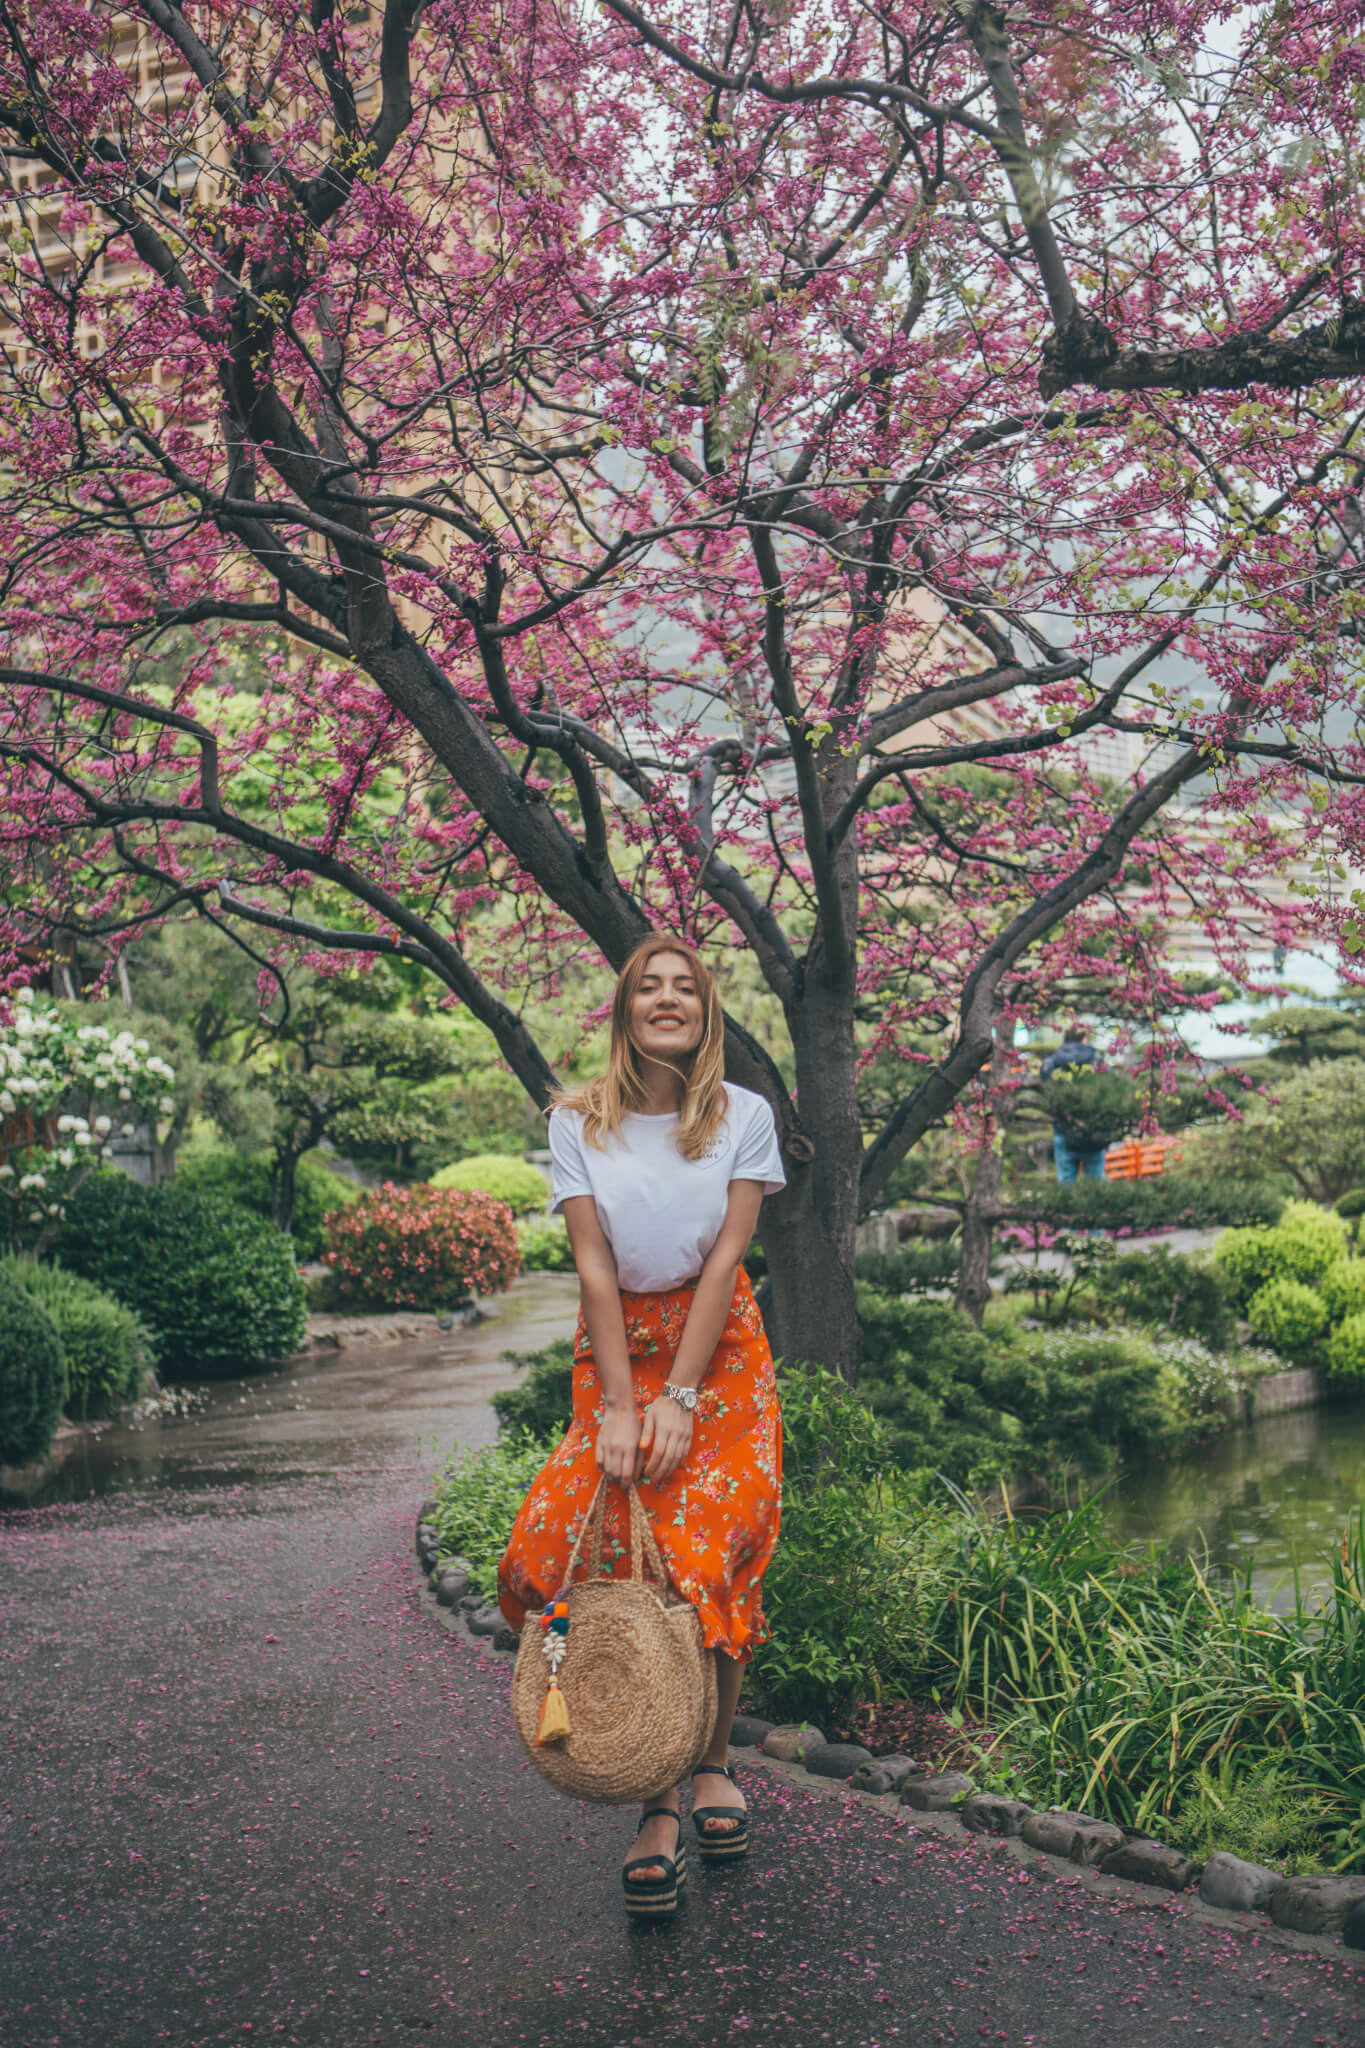 And-Other-Stories-Japanese-Garden-3-of-12-1 Japanese Garden Monaco - What I Wore